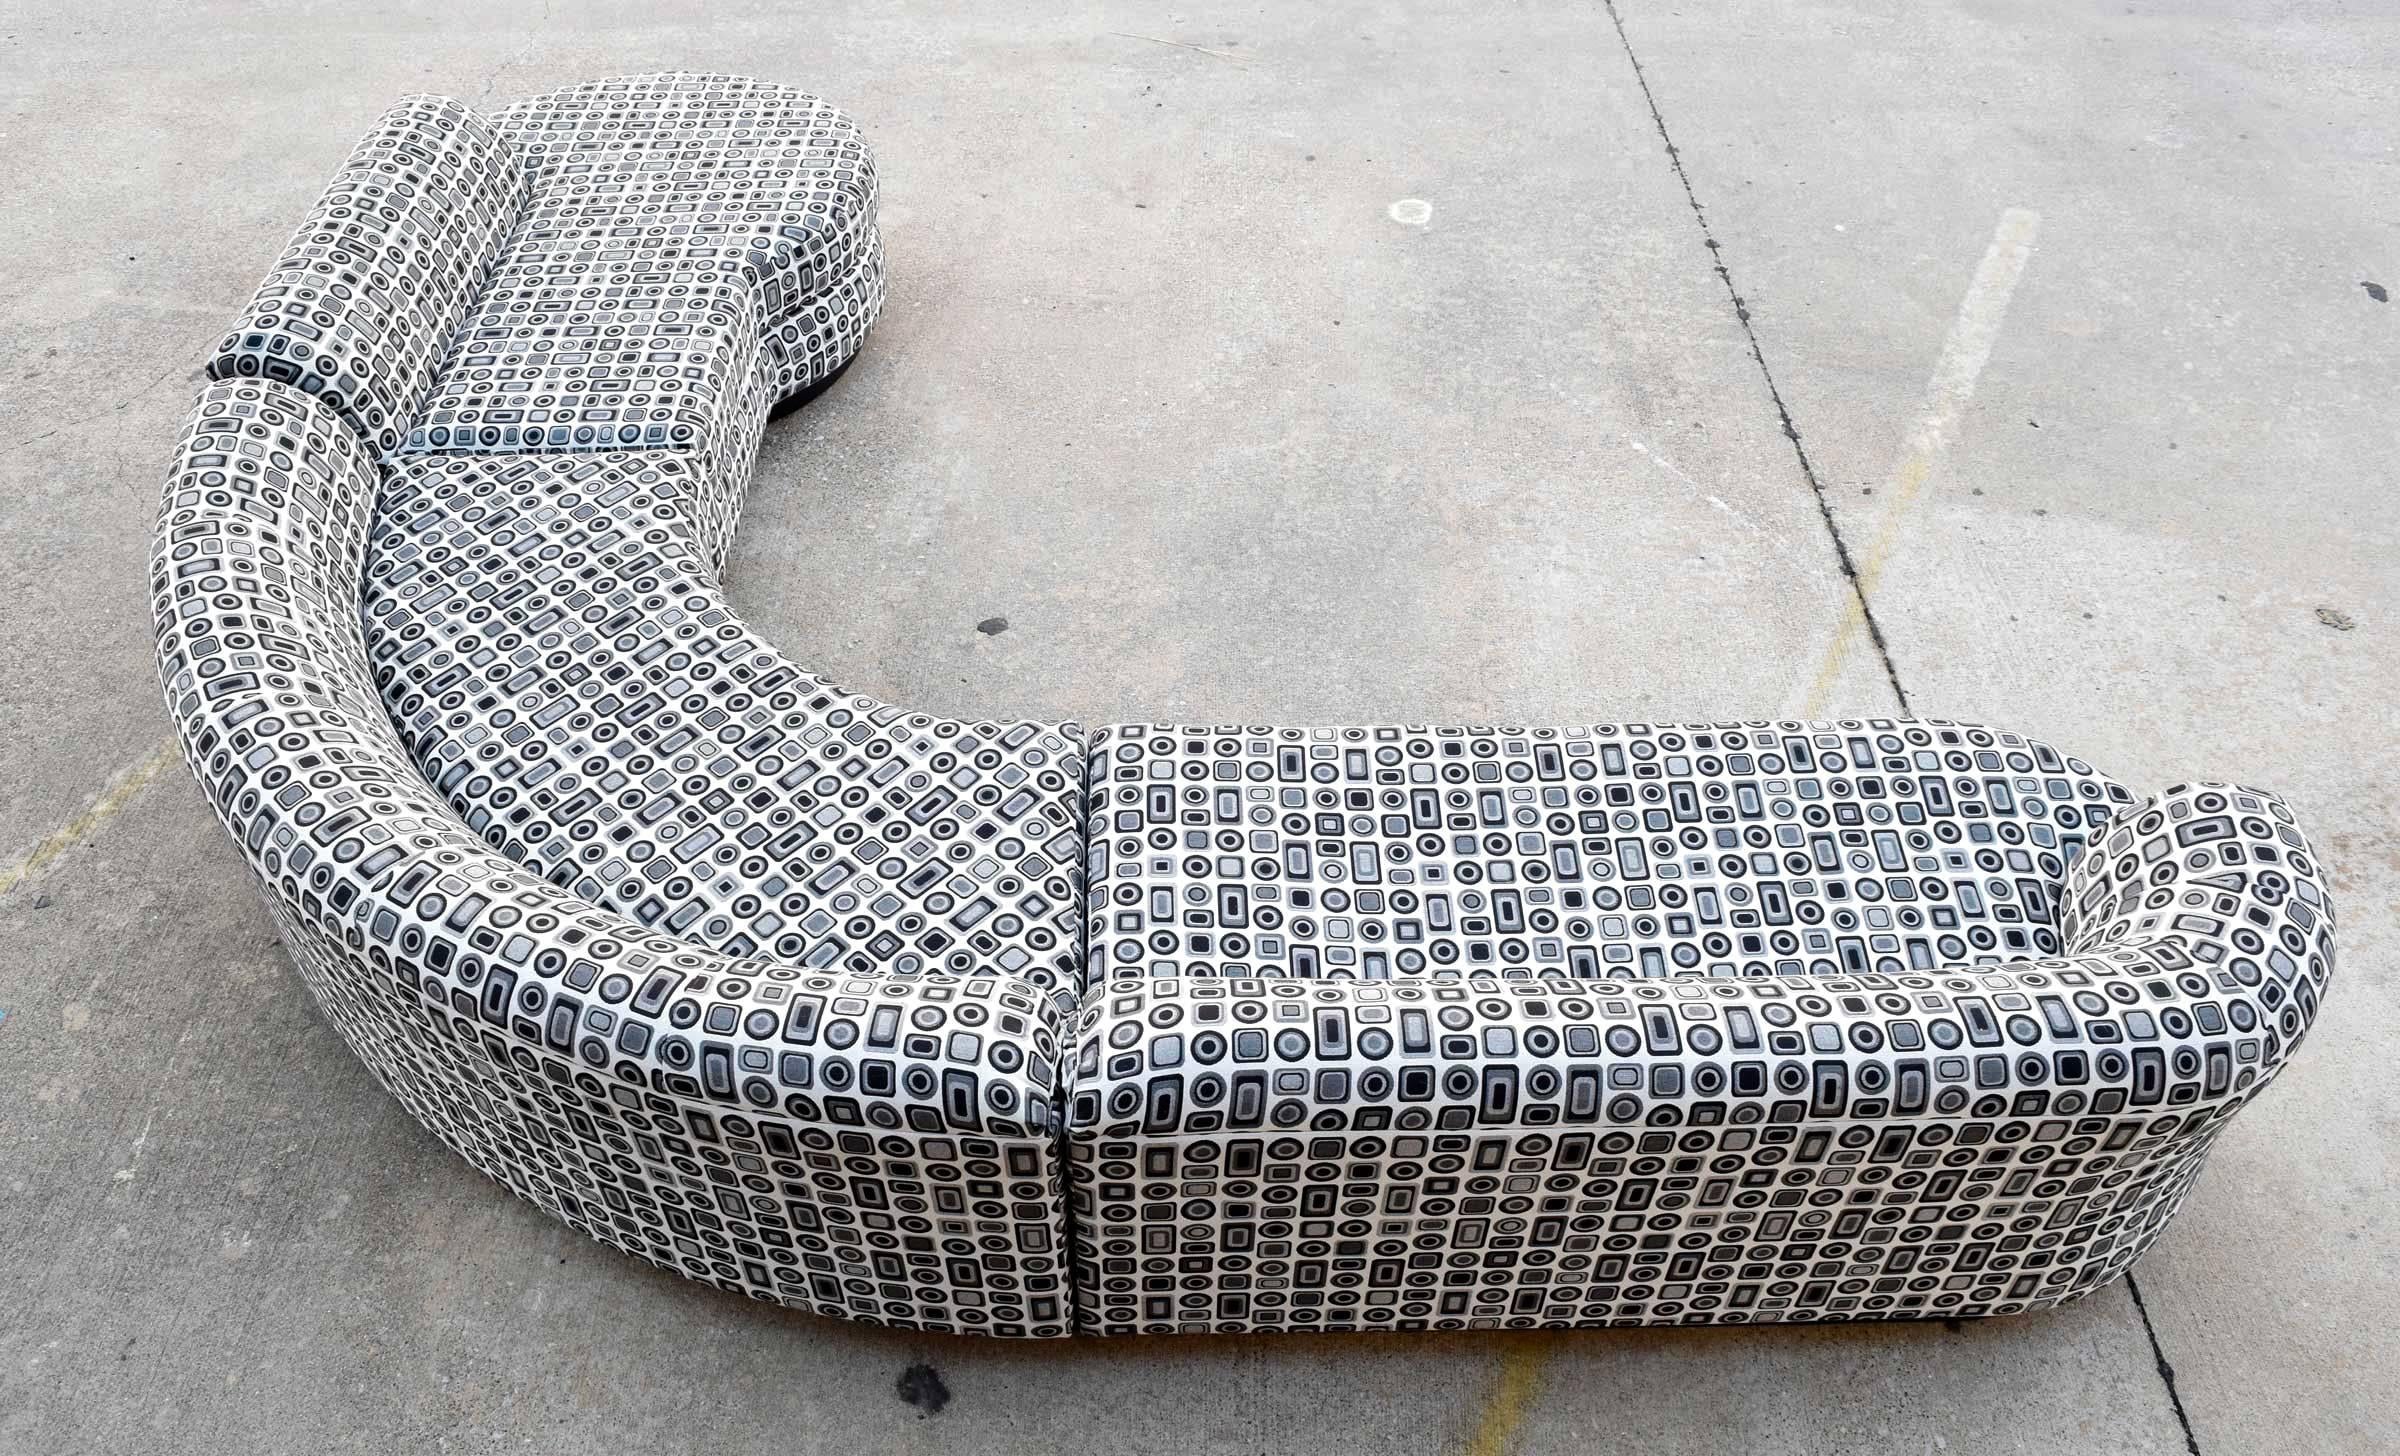 Beautiful three-part sofa by Vladimir Kagan for Directional. This sofa has new upholstery which can be changed if desired.